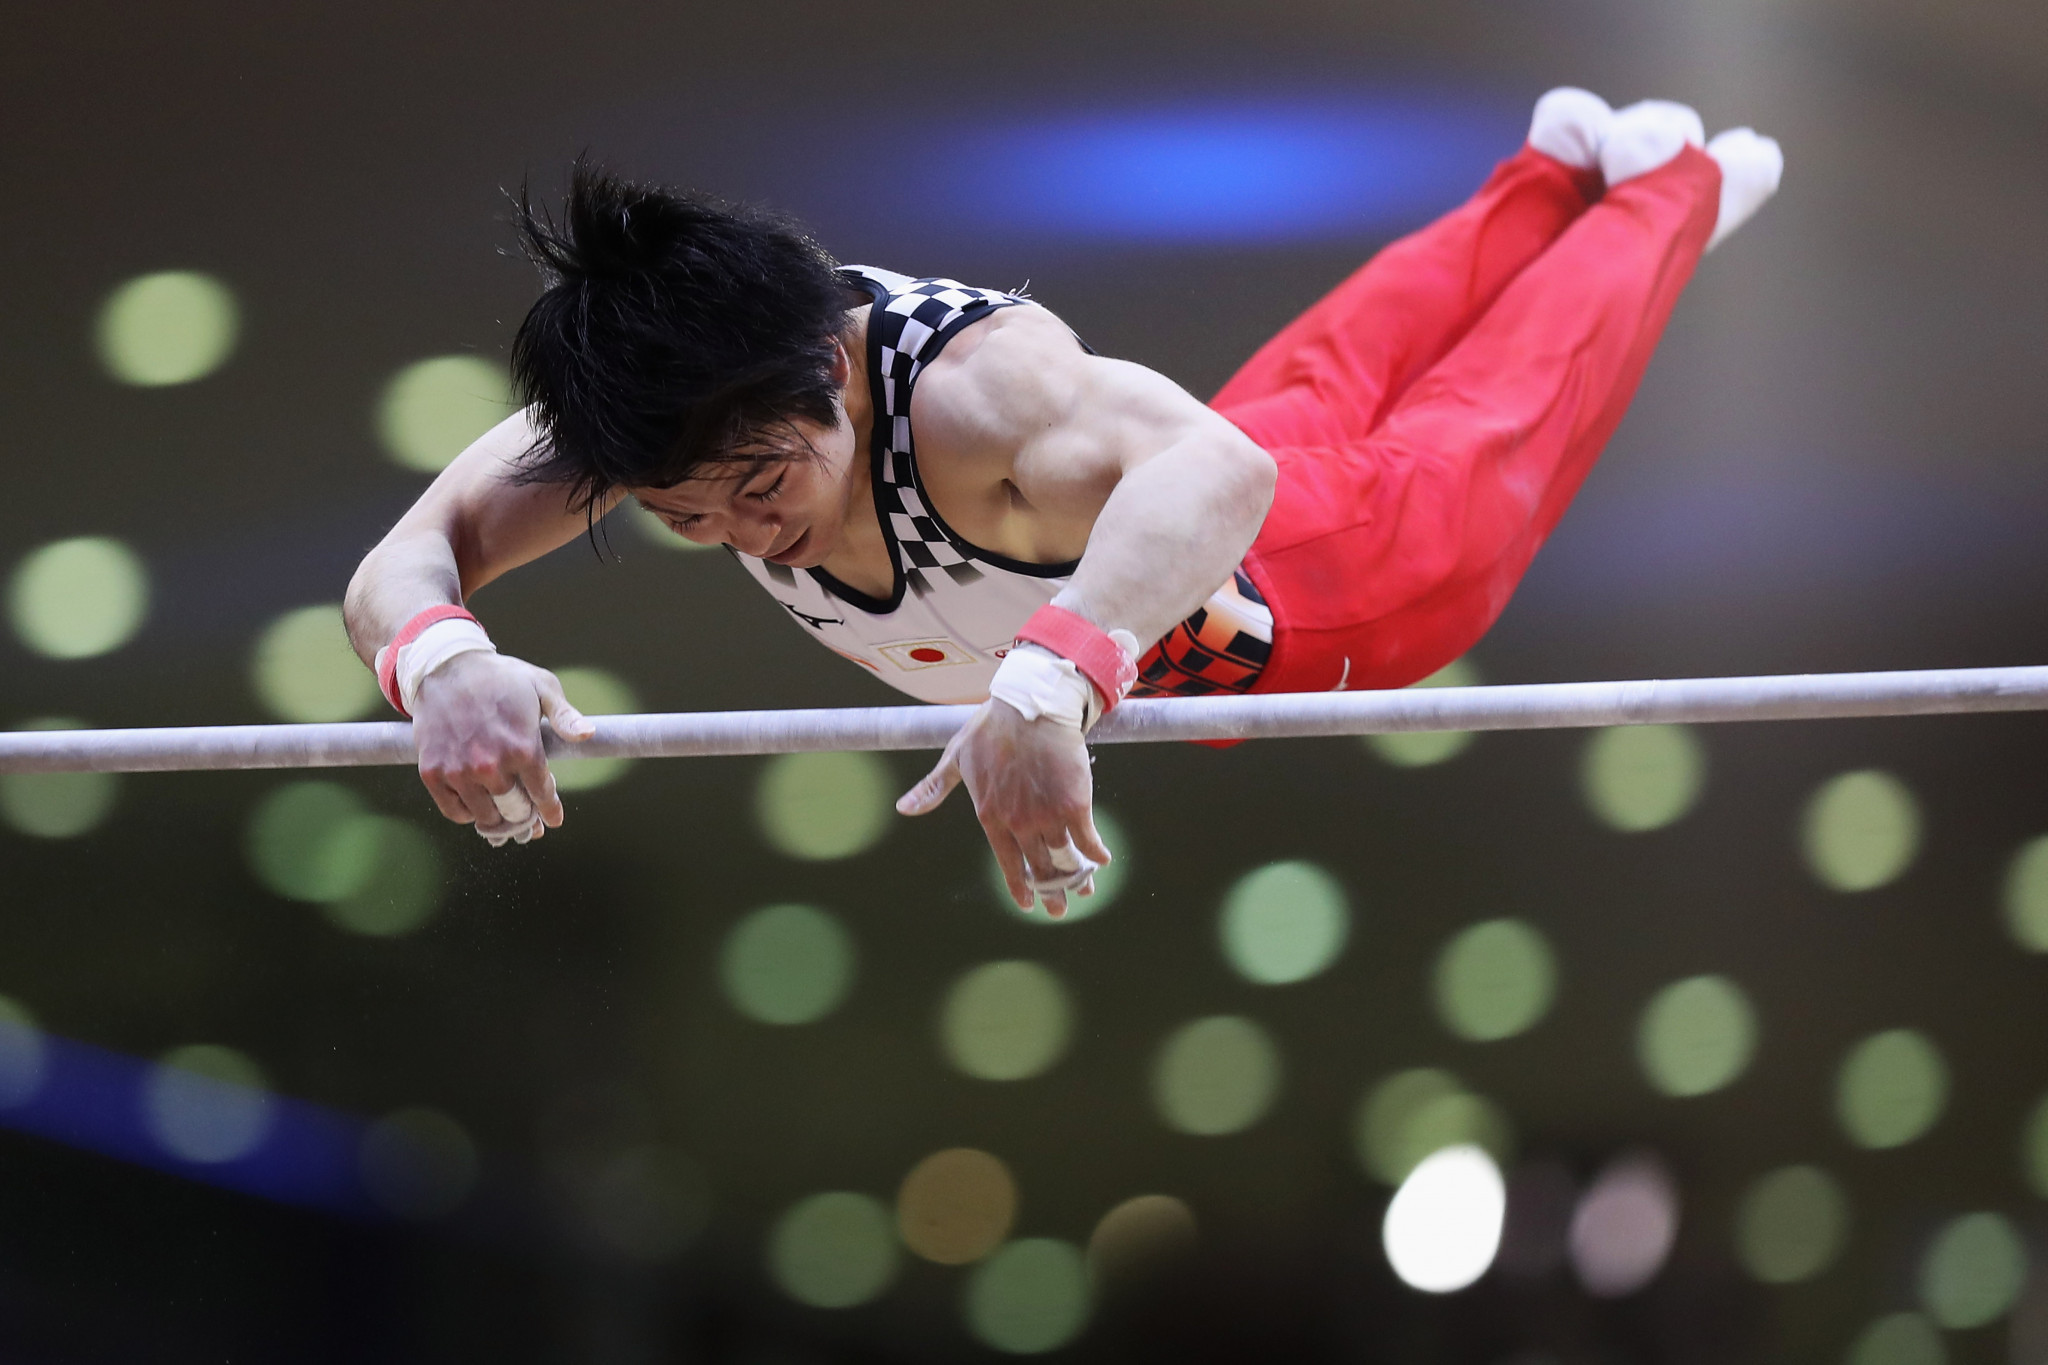 Japan Gymnastics Association have submitted a bid to host the 2023 Artistic Gymnastics World Championships in Tokyo ©Getty Images